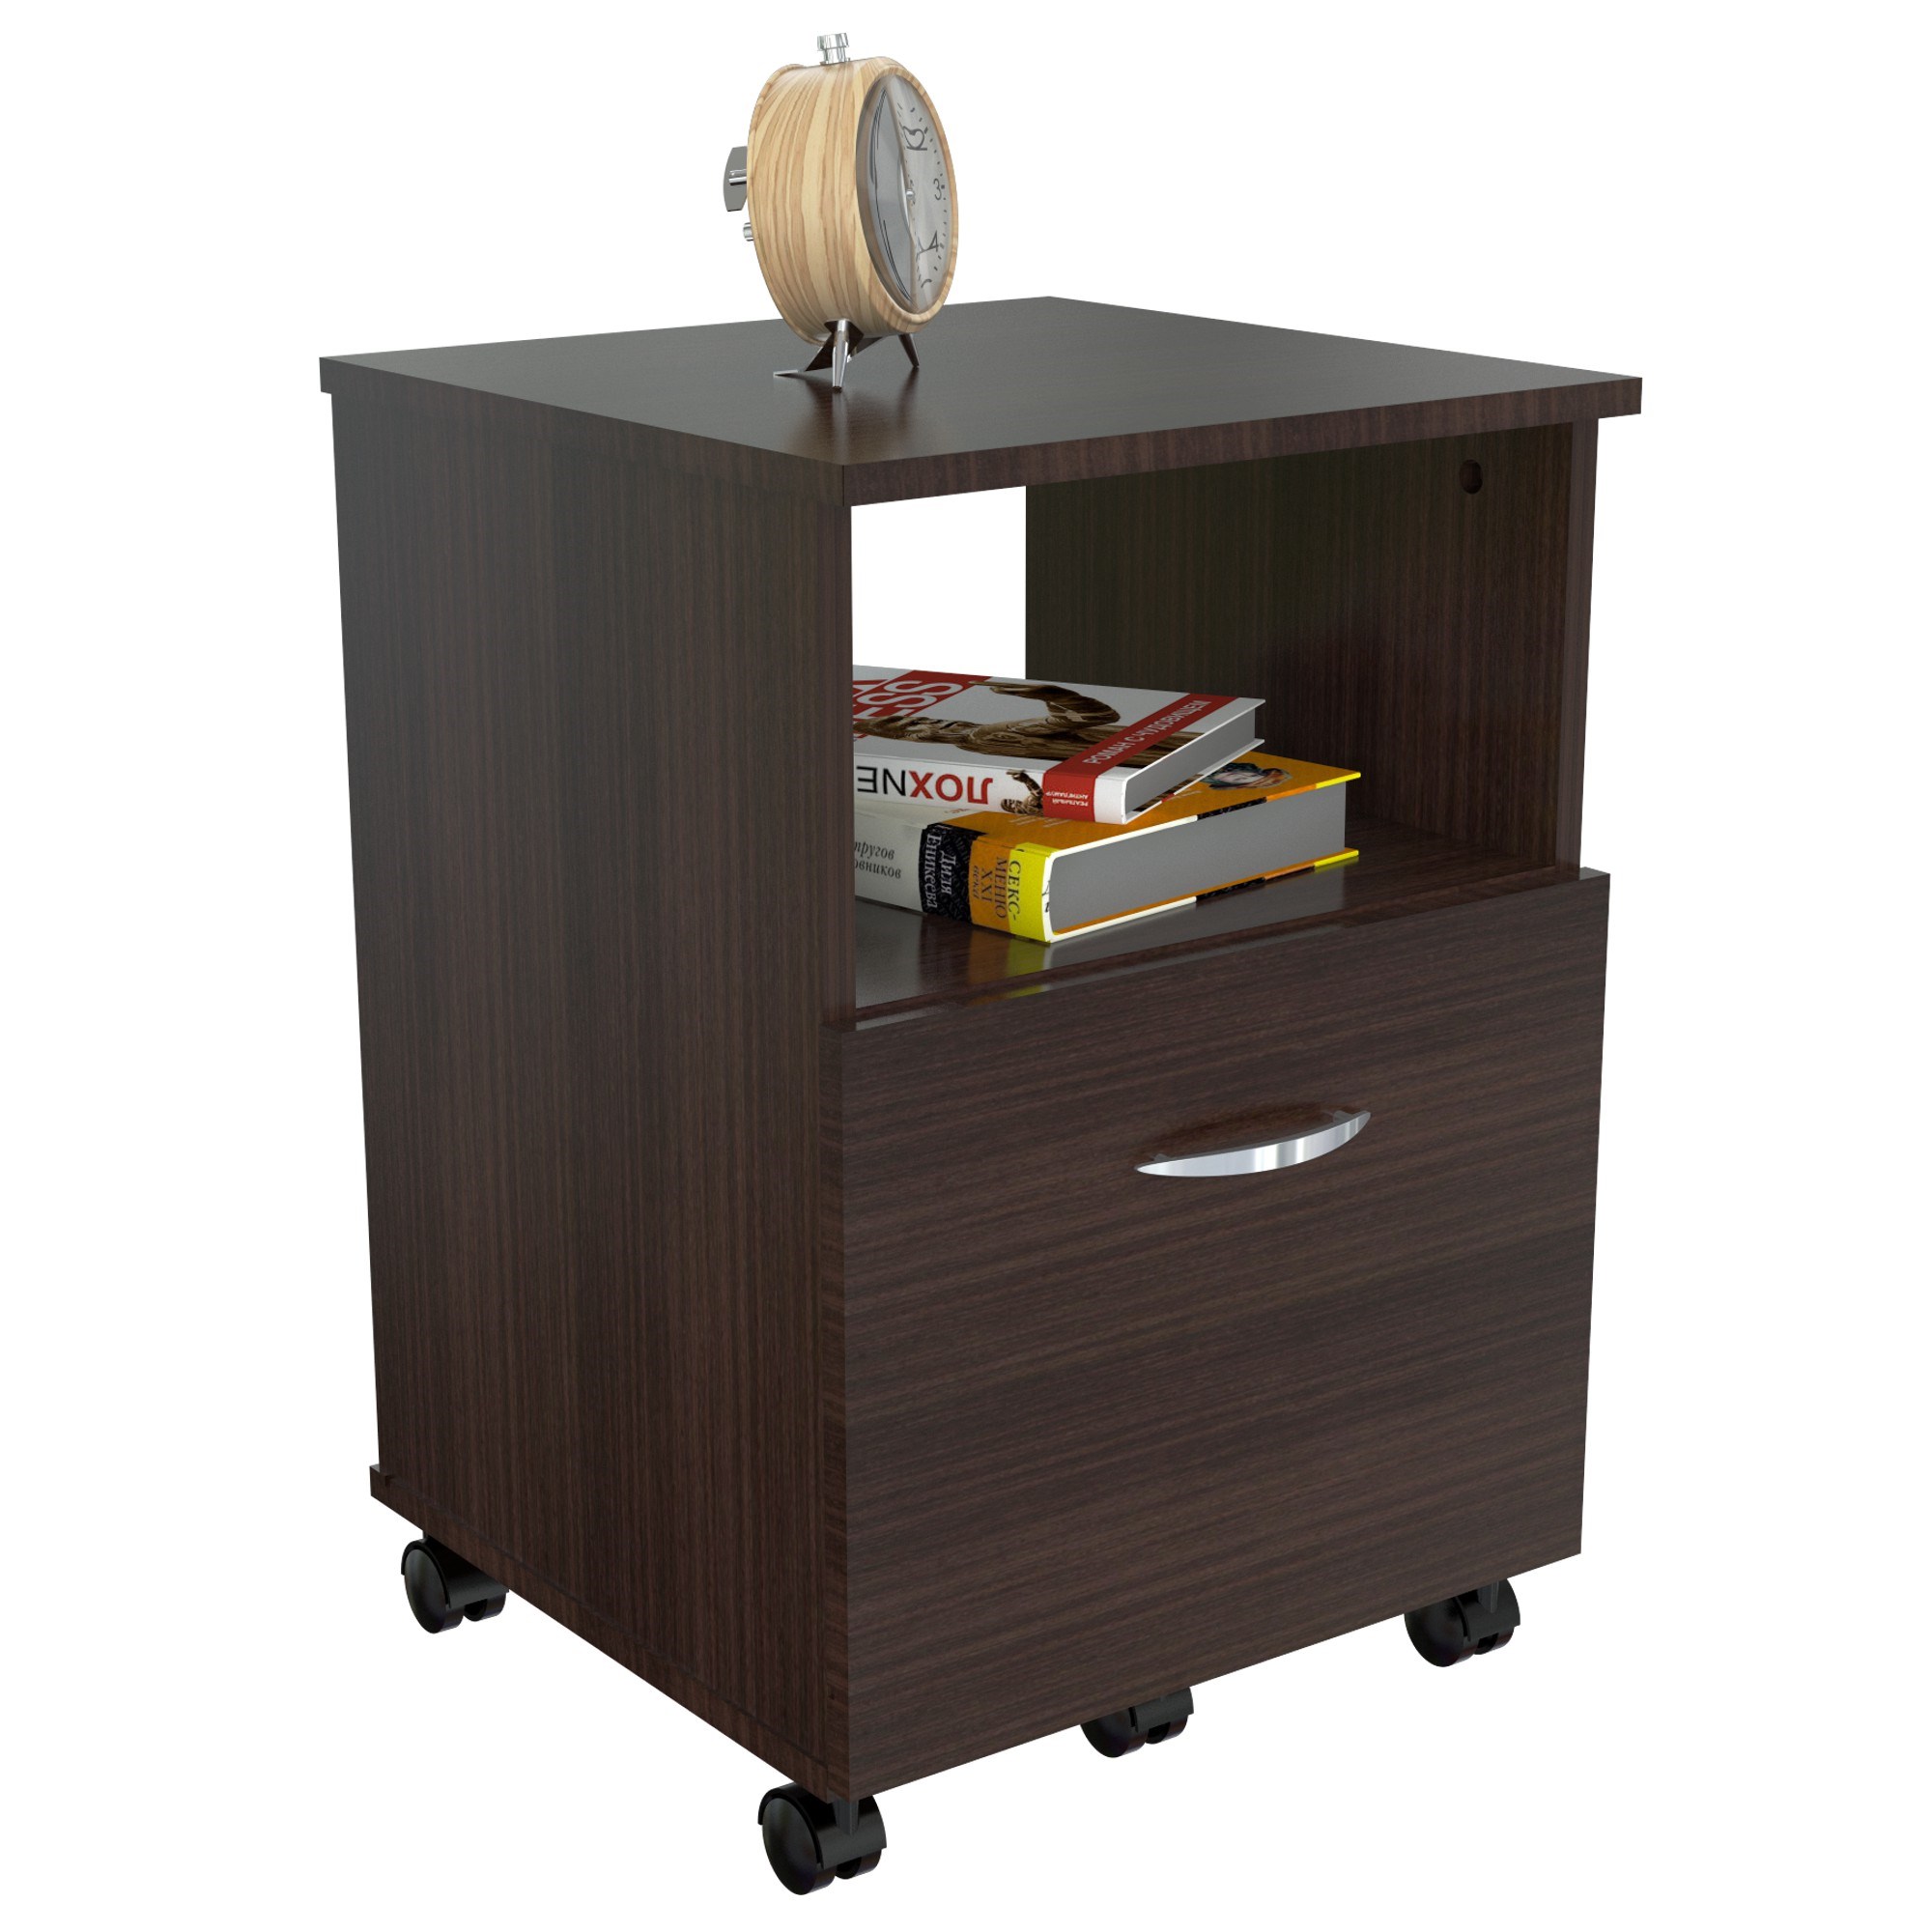 23" Espresso Melamine and Engineered Wood File Cabinet with a Drawer